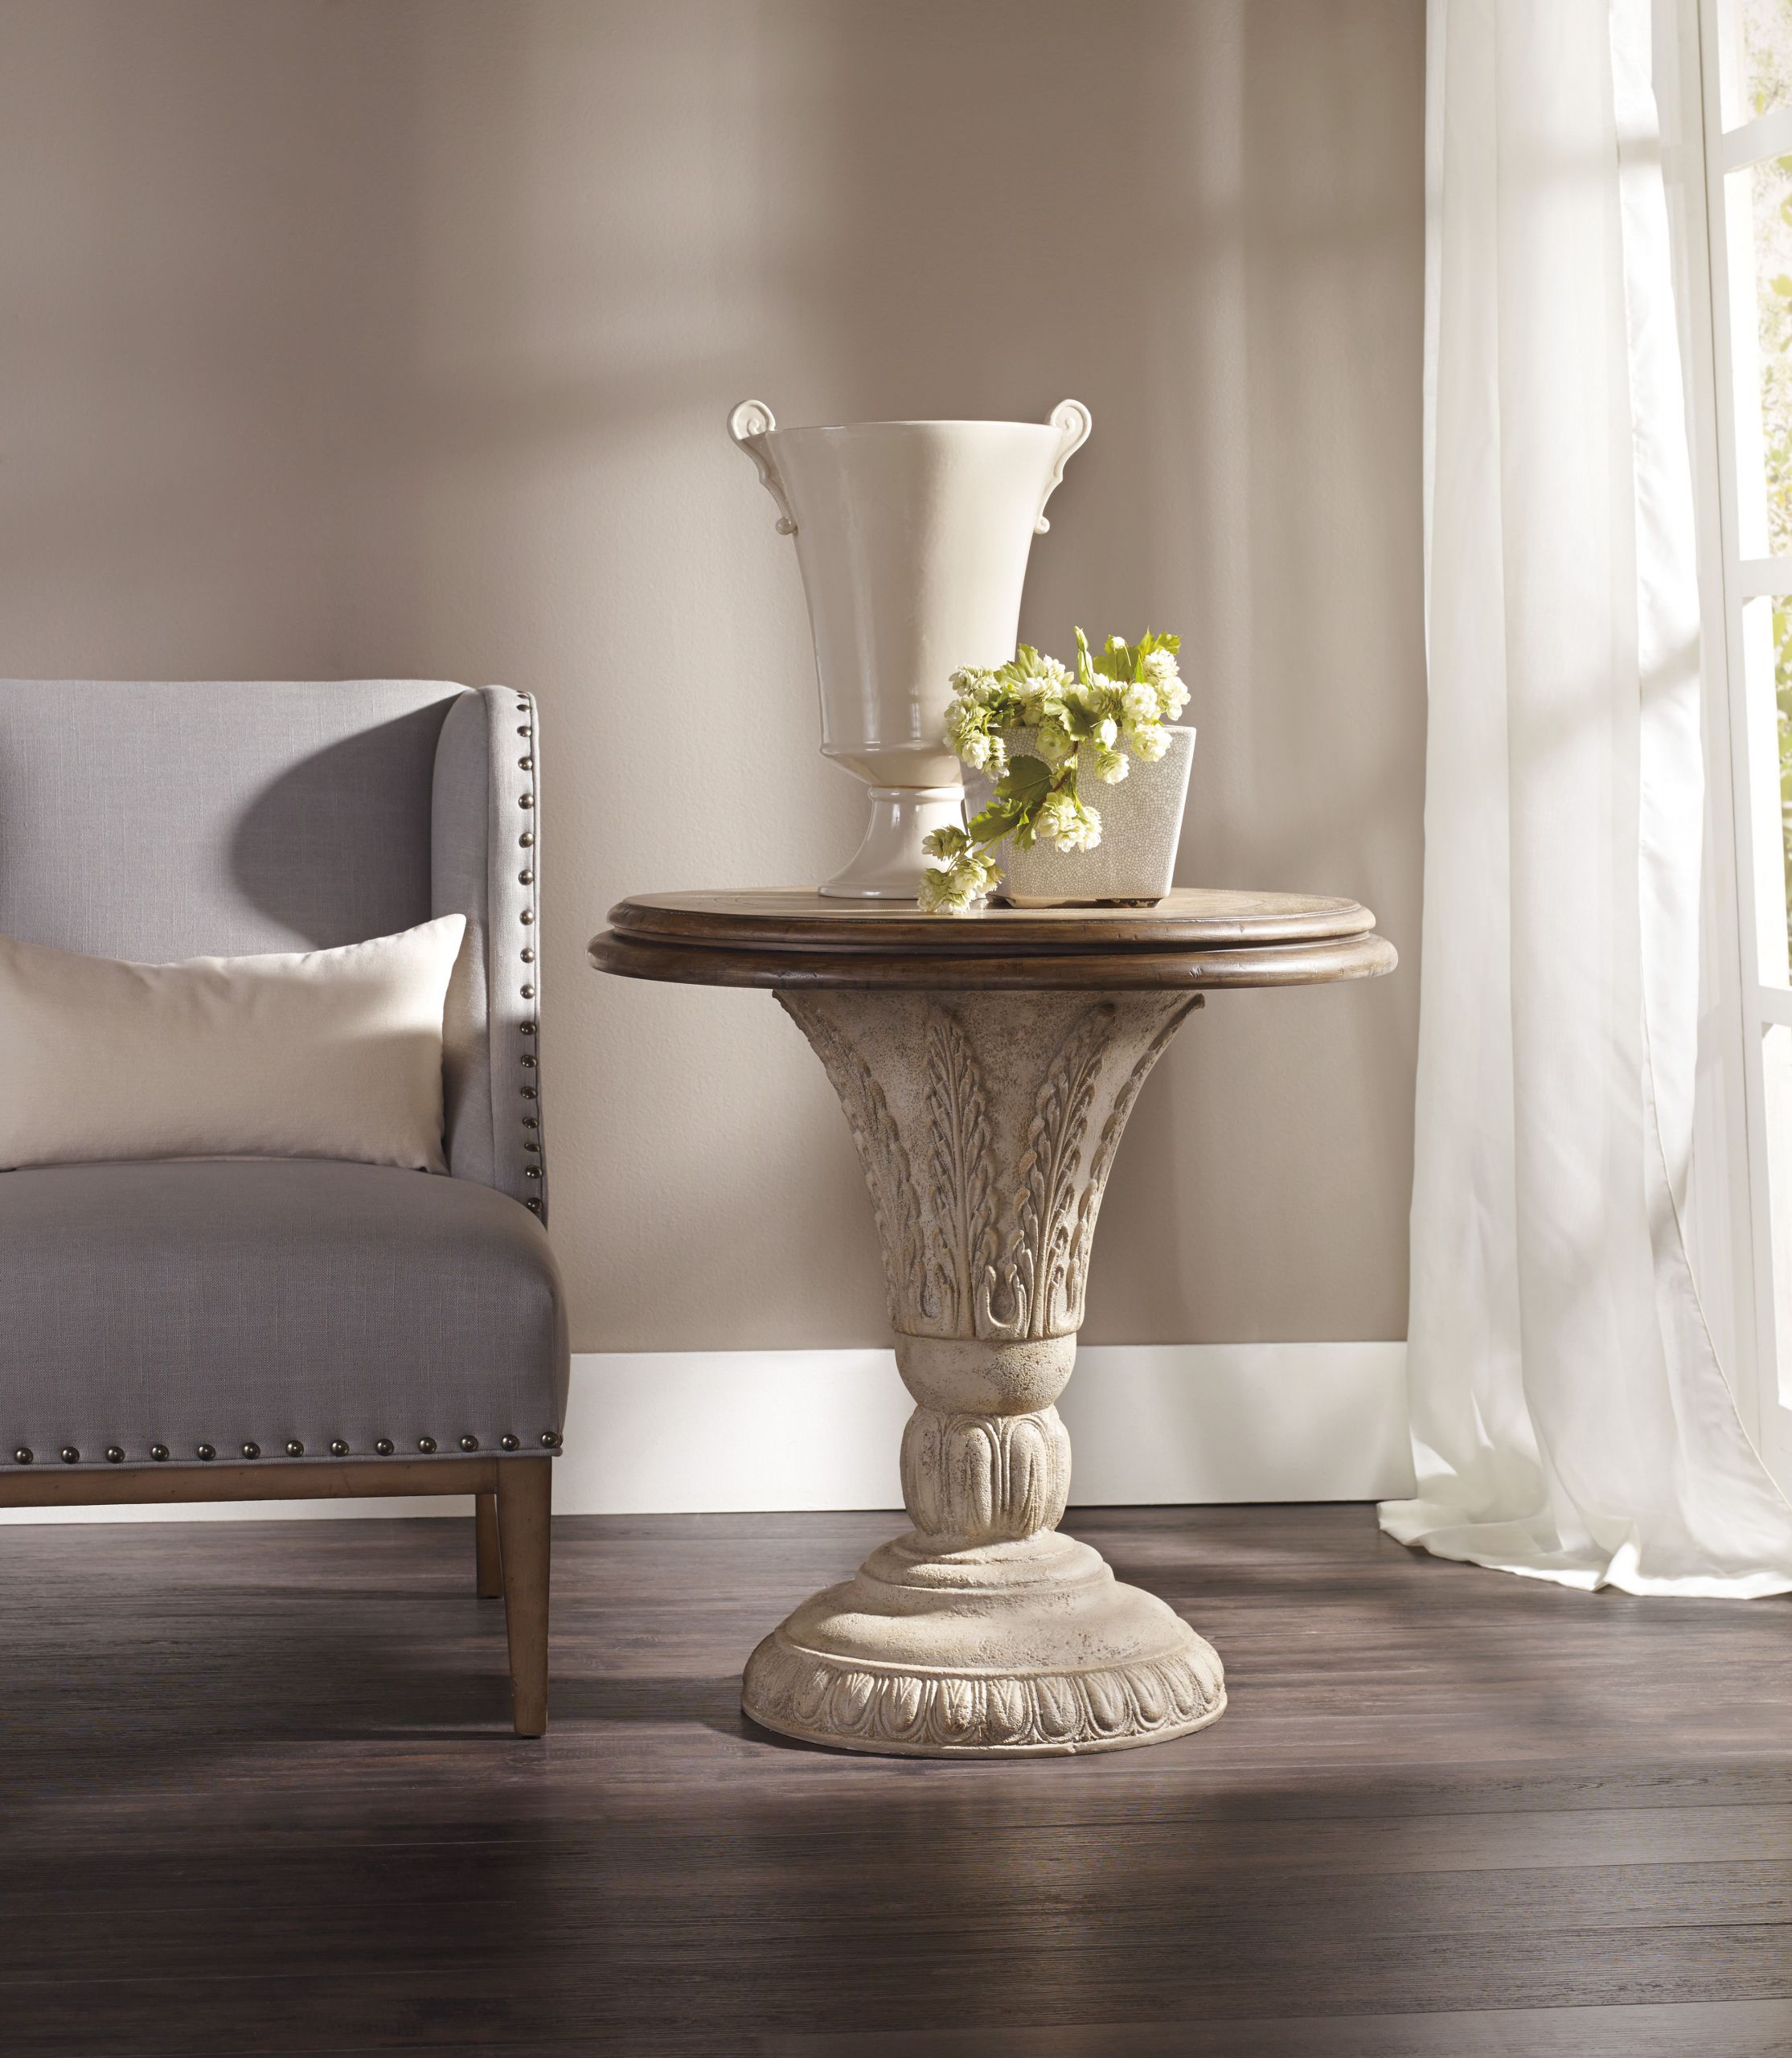 Accent Living Room Tables
 Solana Round Accent Table 5391